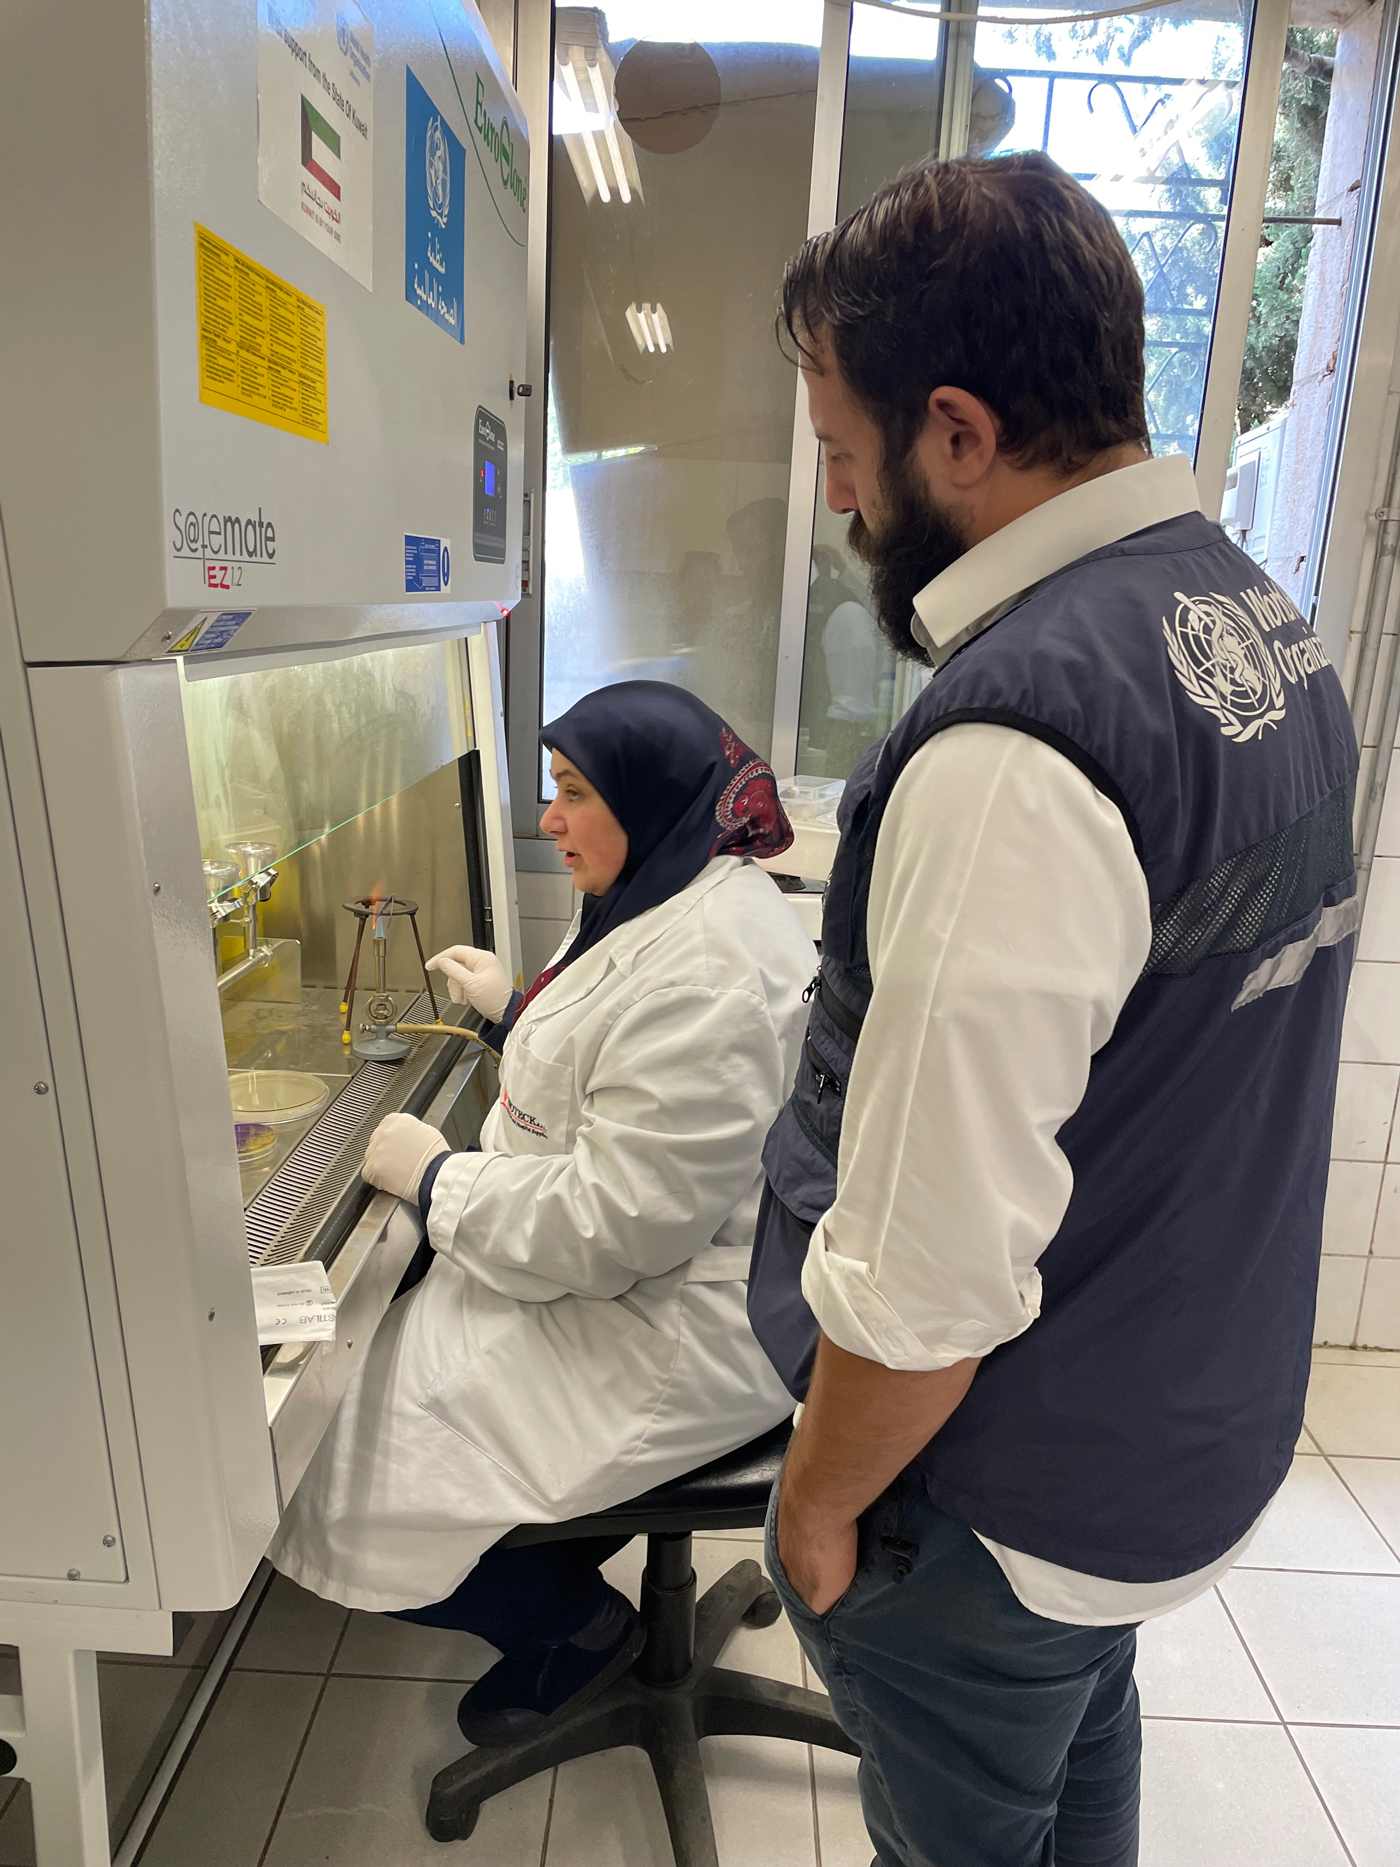 Mission-members-provided-their-support-to-respond-to-the-cholera-outbreak-in-Lebanon-